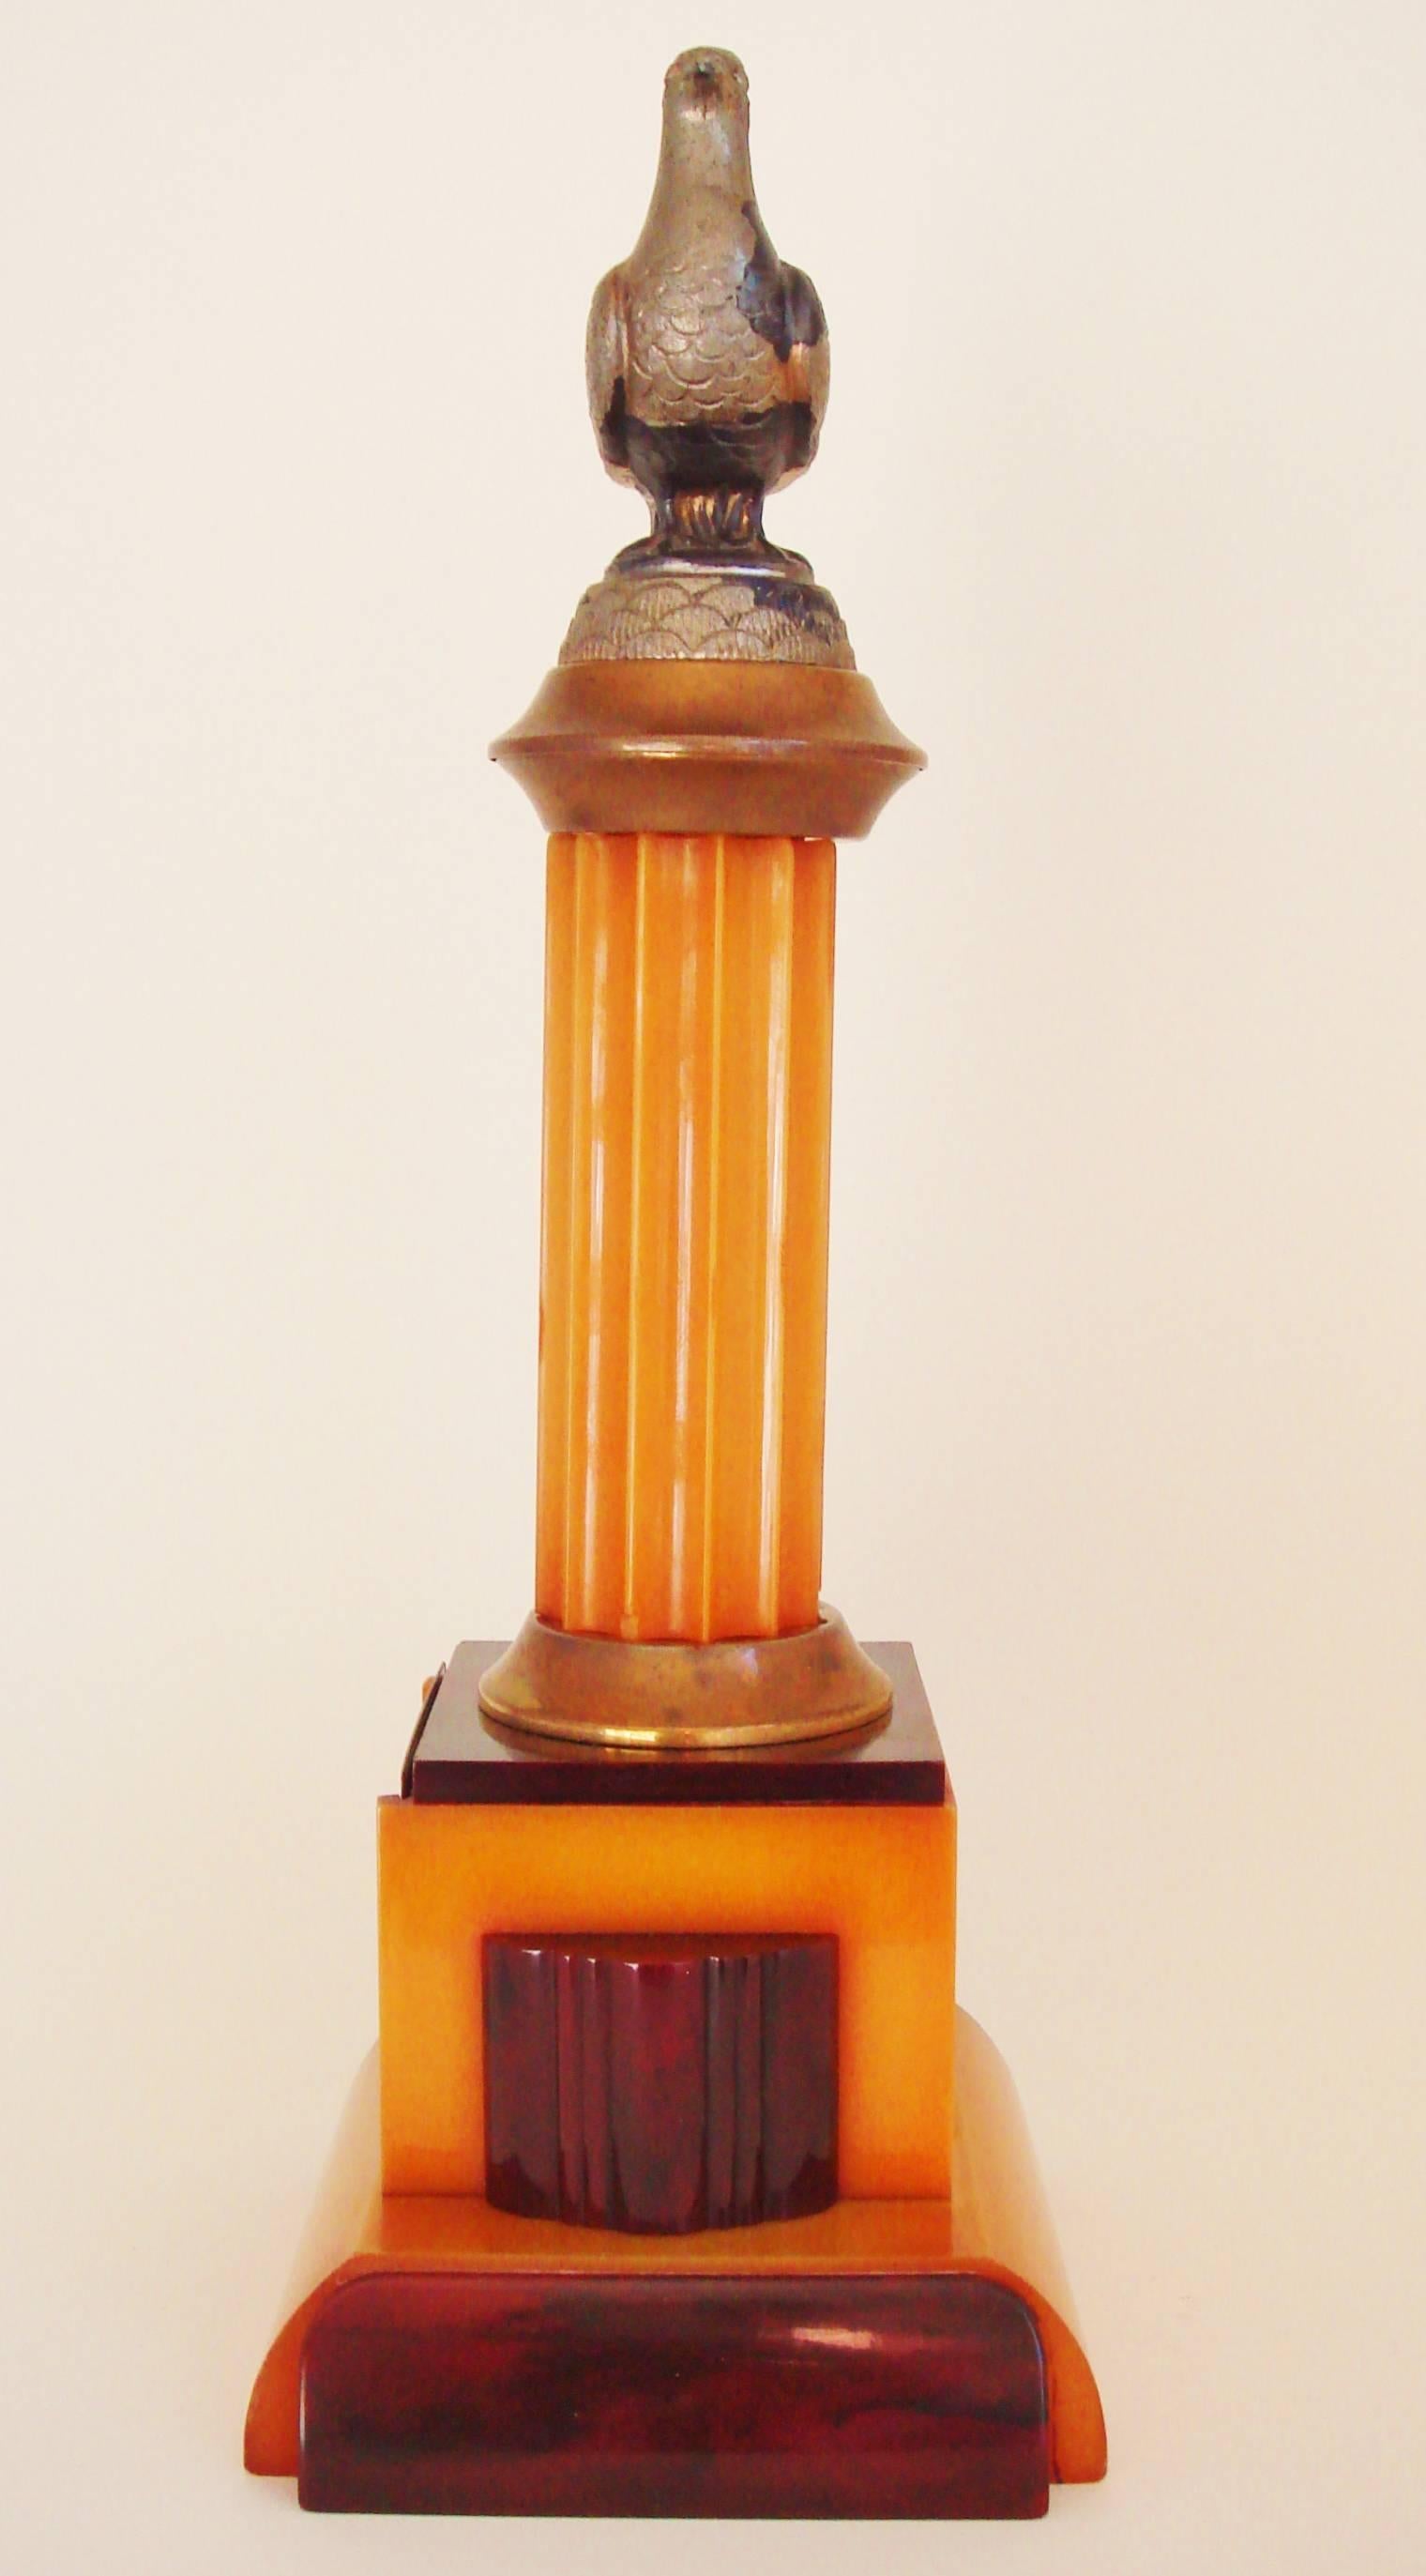 This rare American Art Deco pigeon racing trophy features a very architecturally designed fluted base column in yellow and marbled burgundy Catalin Bakelite with the yellow areas having aged to a rich amber. It was made by the long established